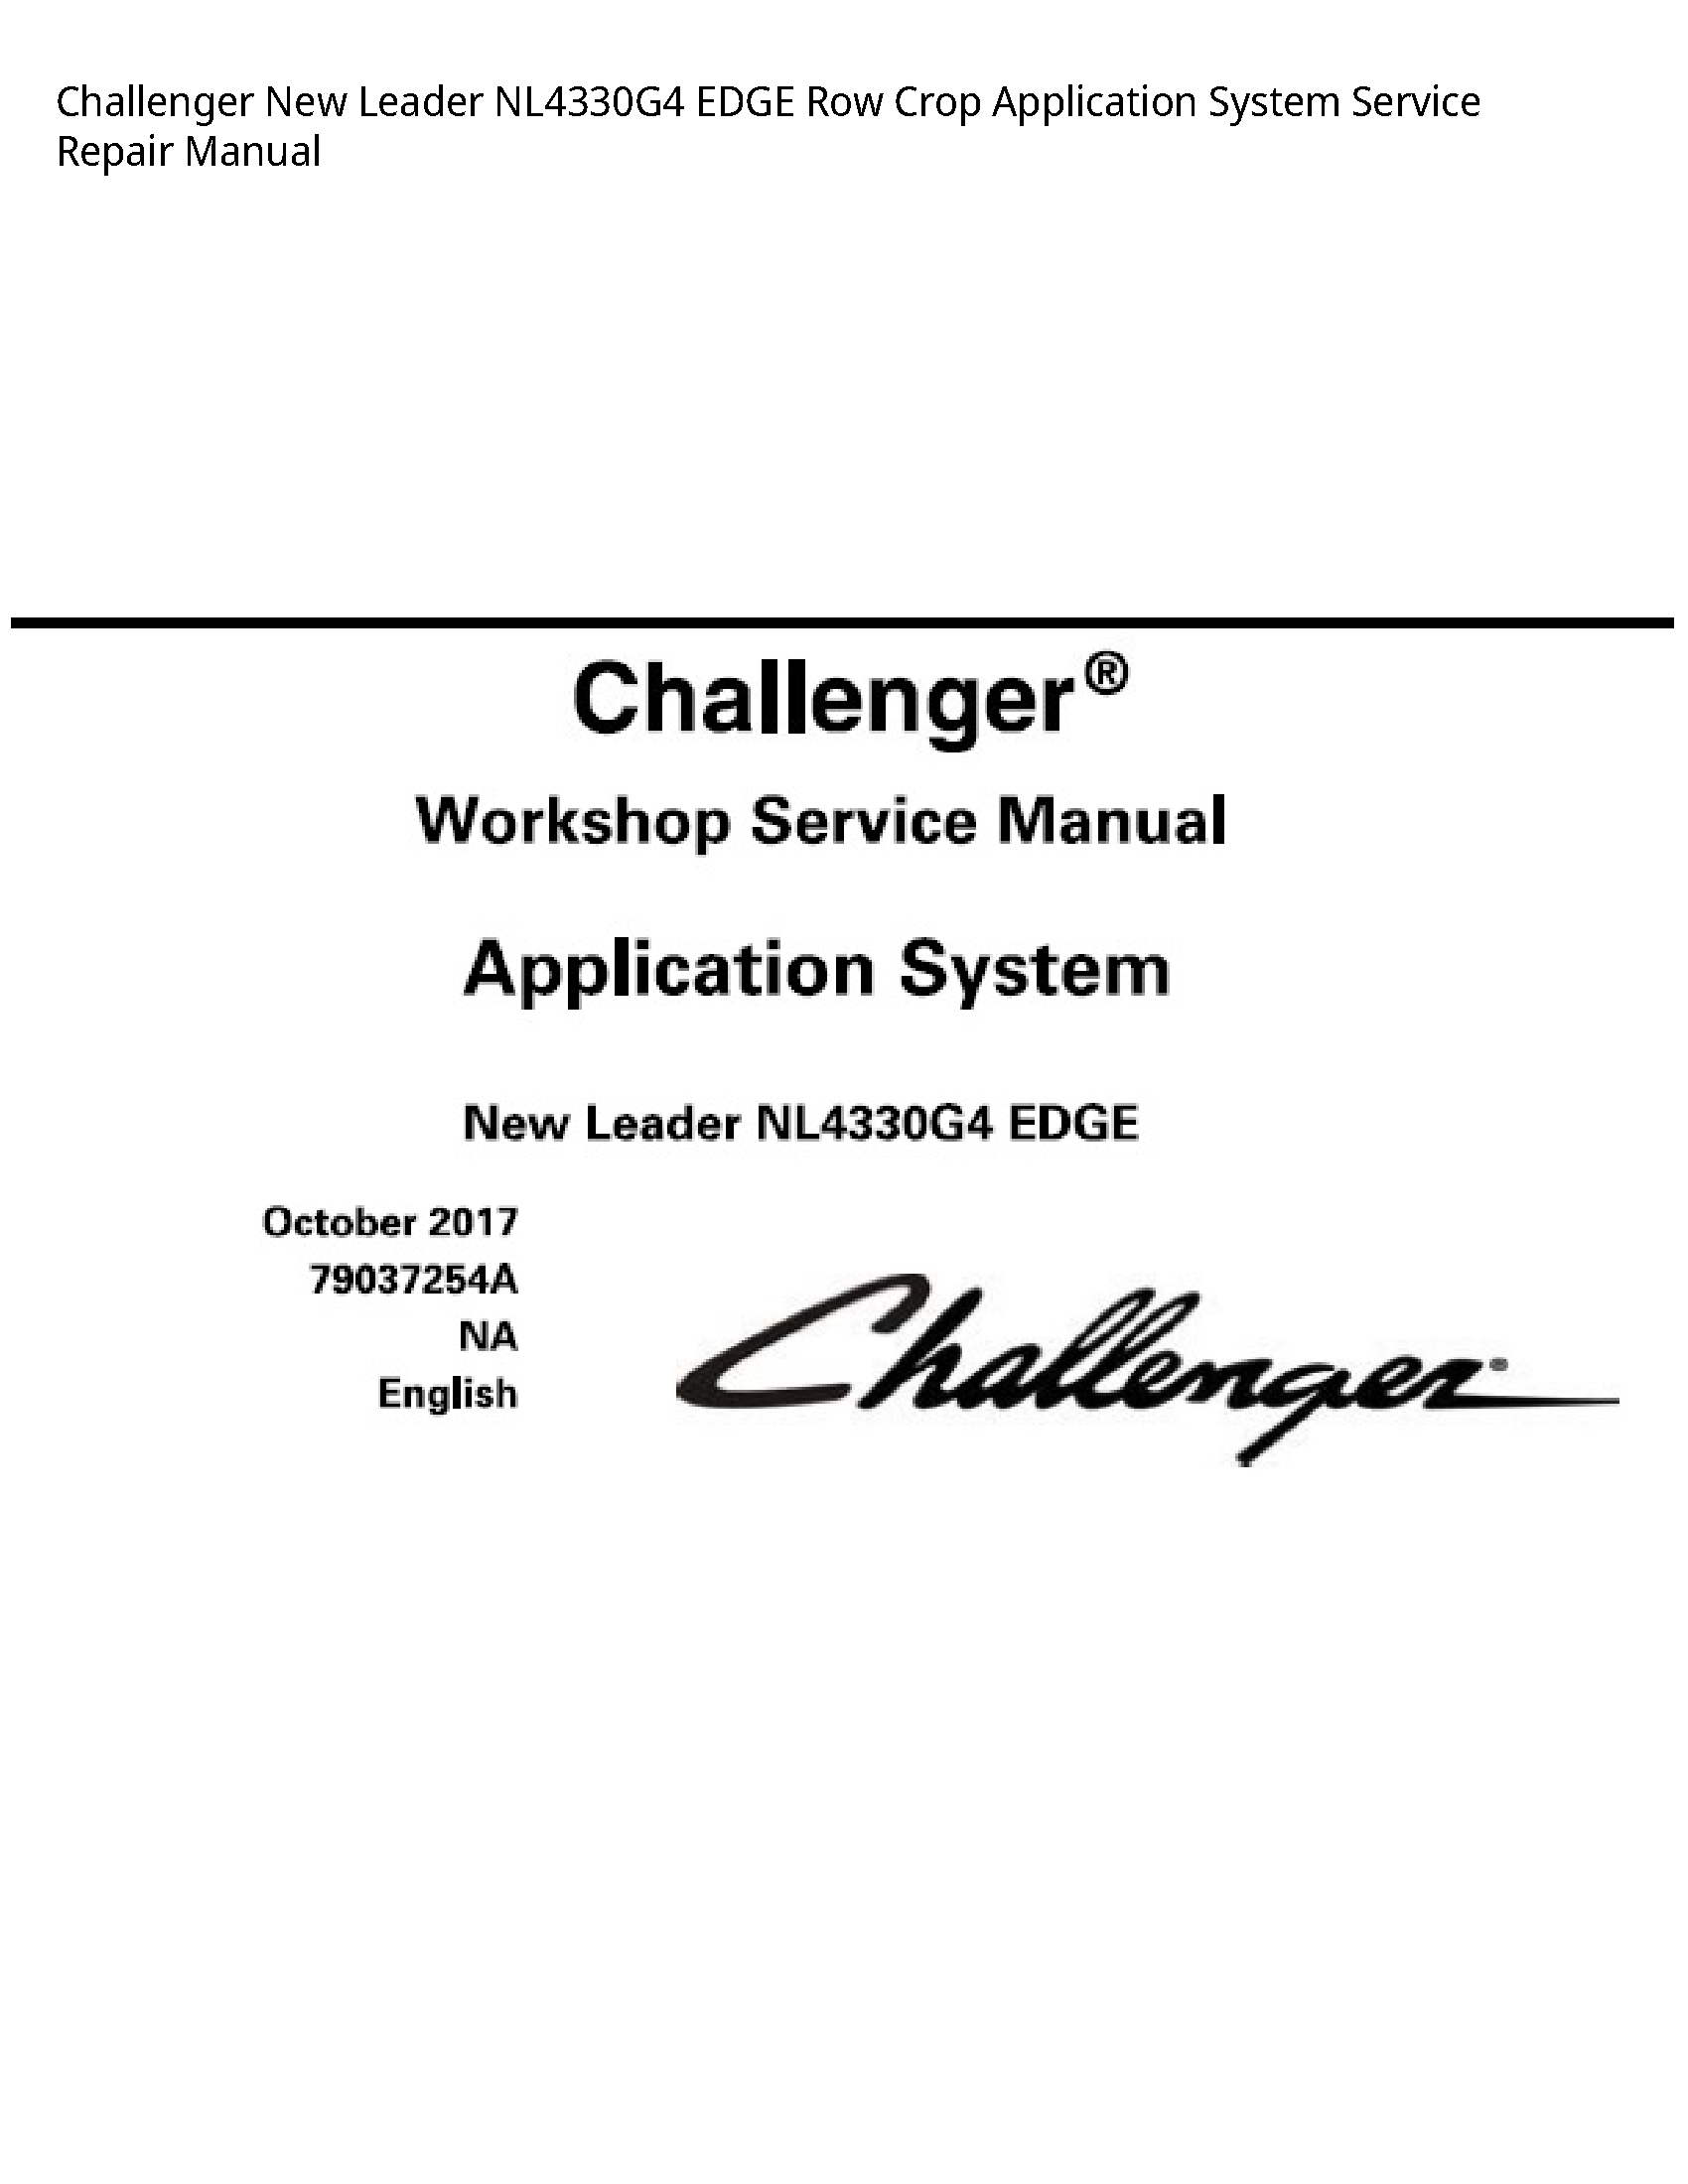 Challenger NL4330G4 New Leader EDGE Row Crop Application System manual